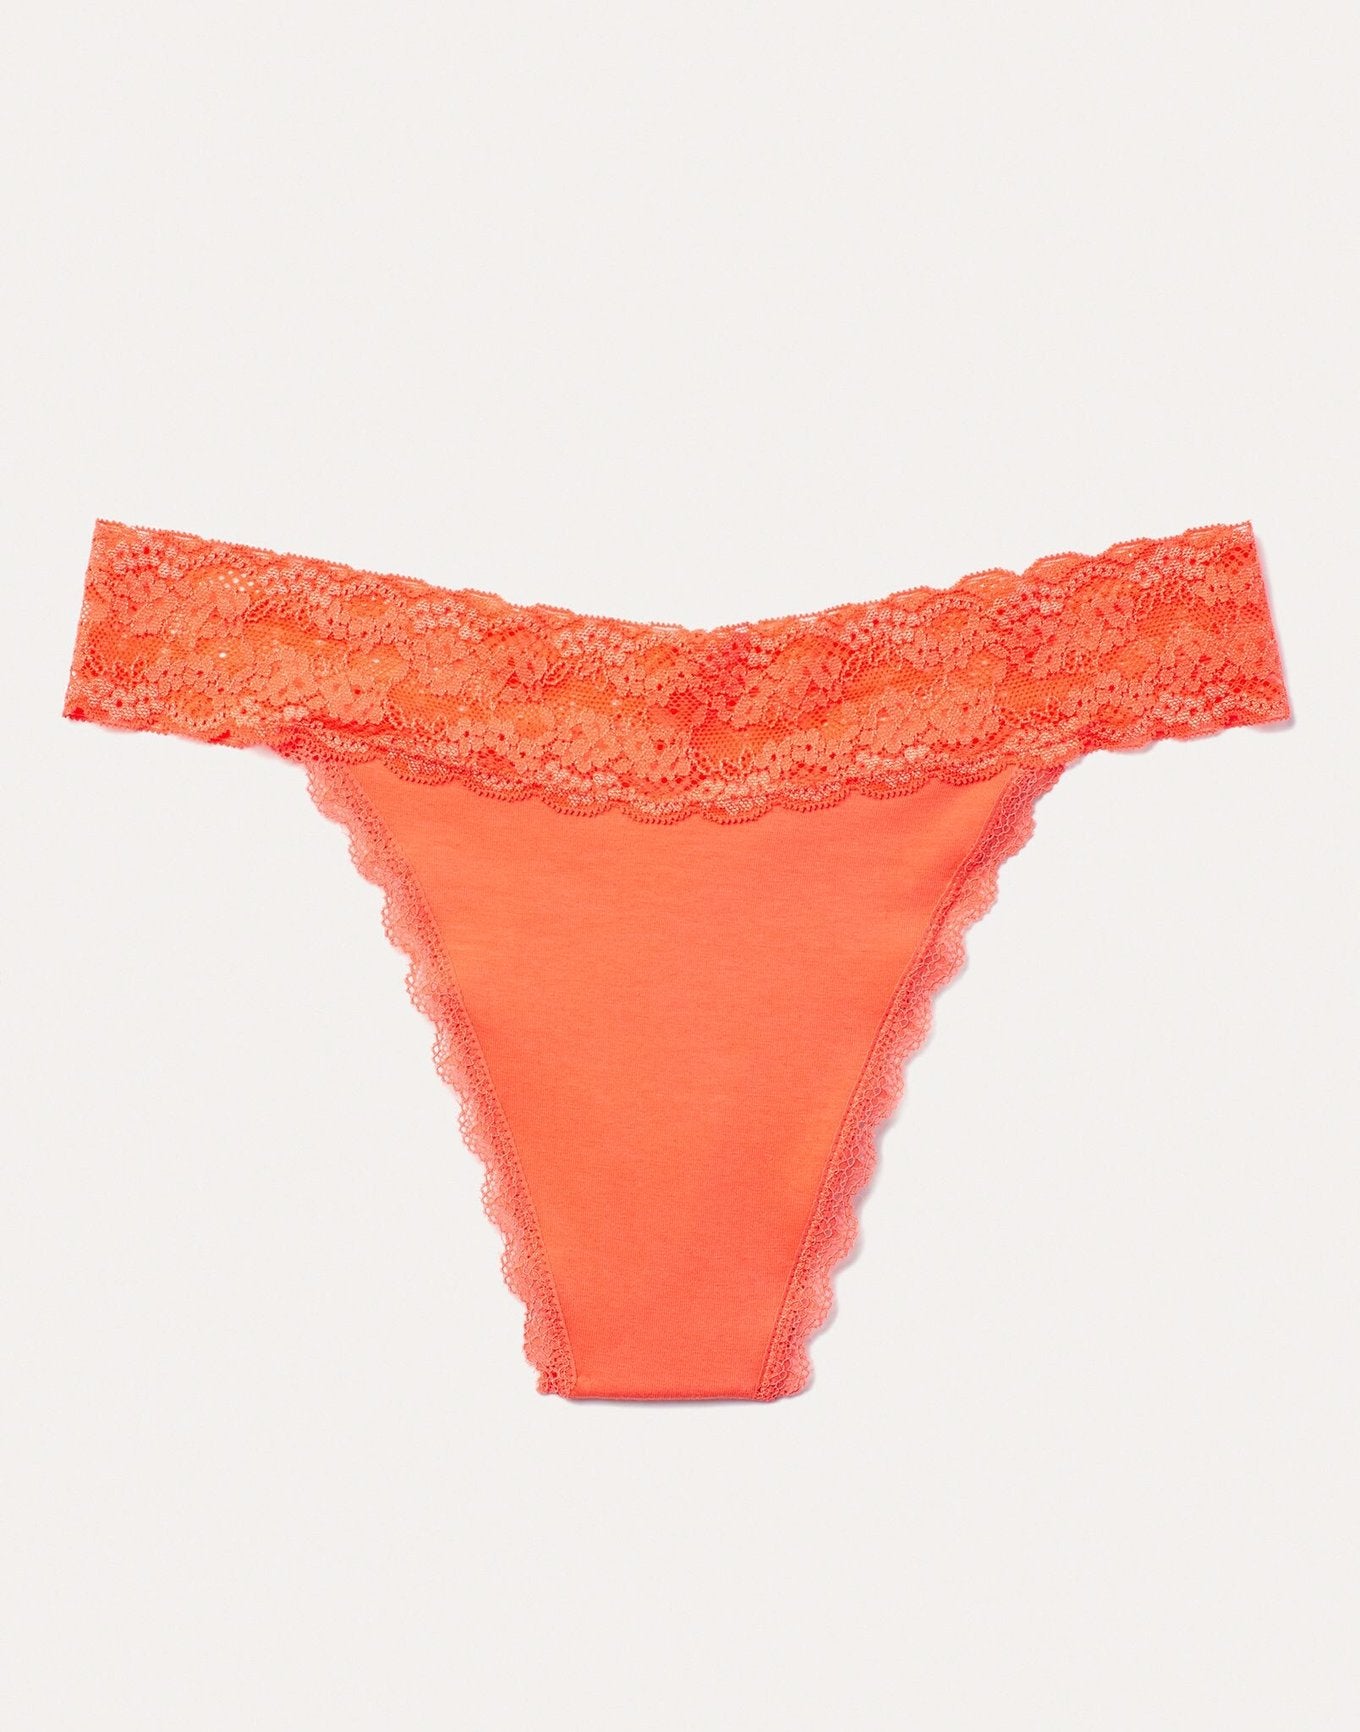 Joyja Lily period-proof panty in color Living Coral and shape thong